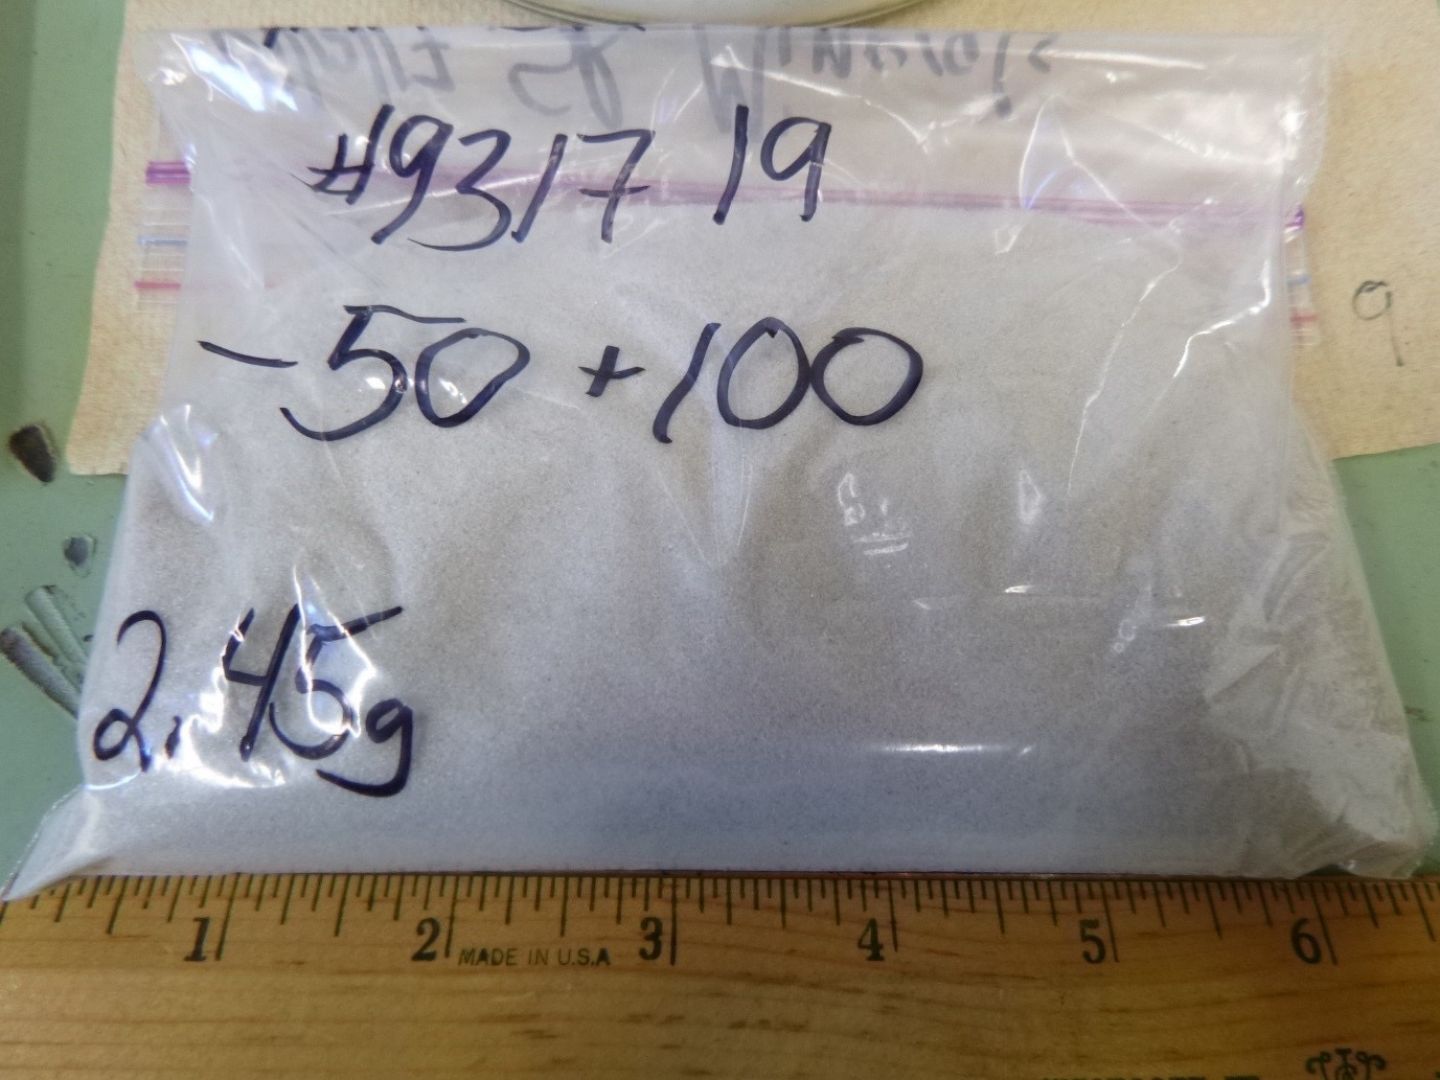 Raw unexpanded (sized) perlite Sample 931719 from CS Project